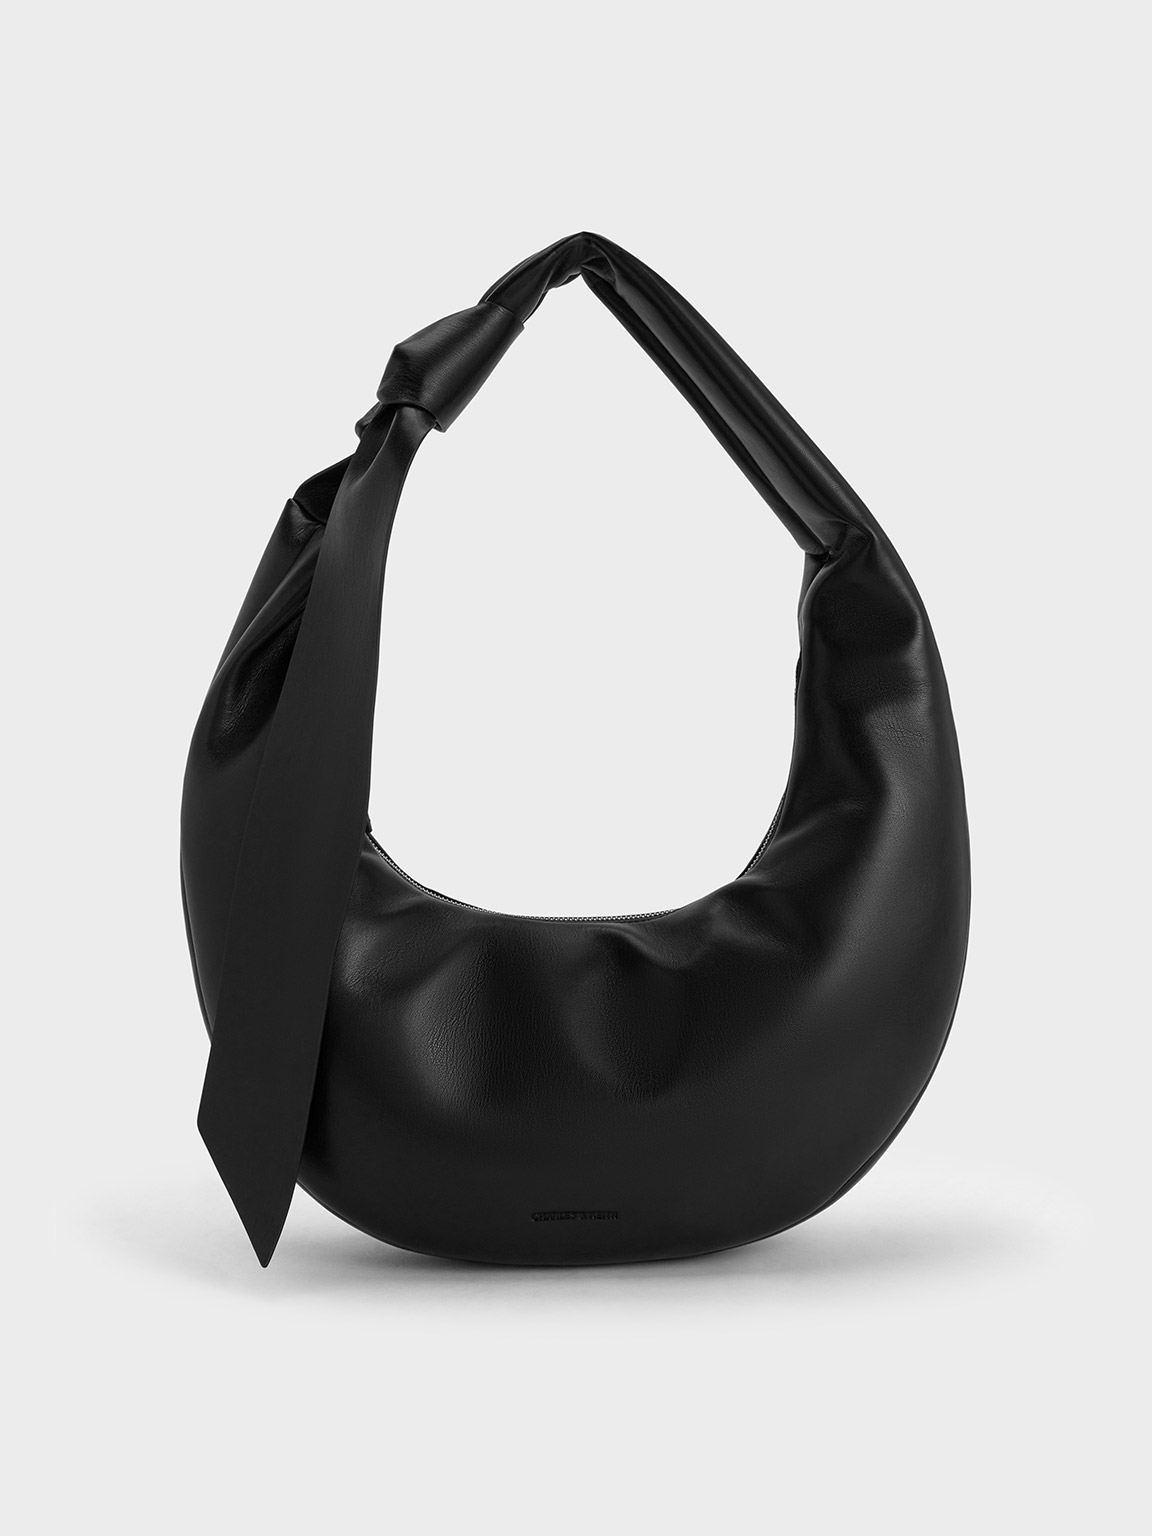 Charles & Keith Toni Knotted Curved Hobo Bag In Noir